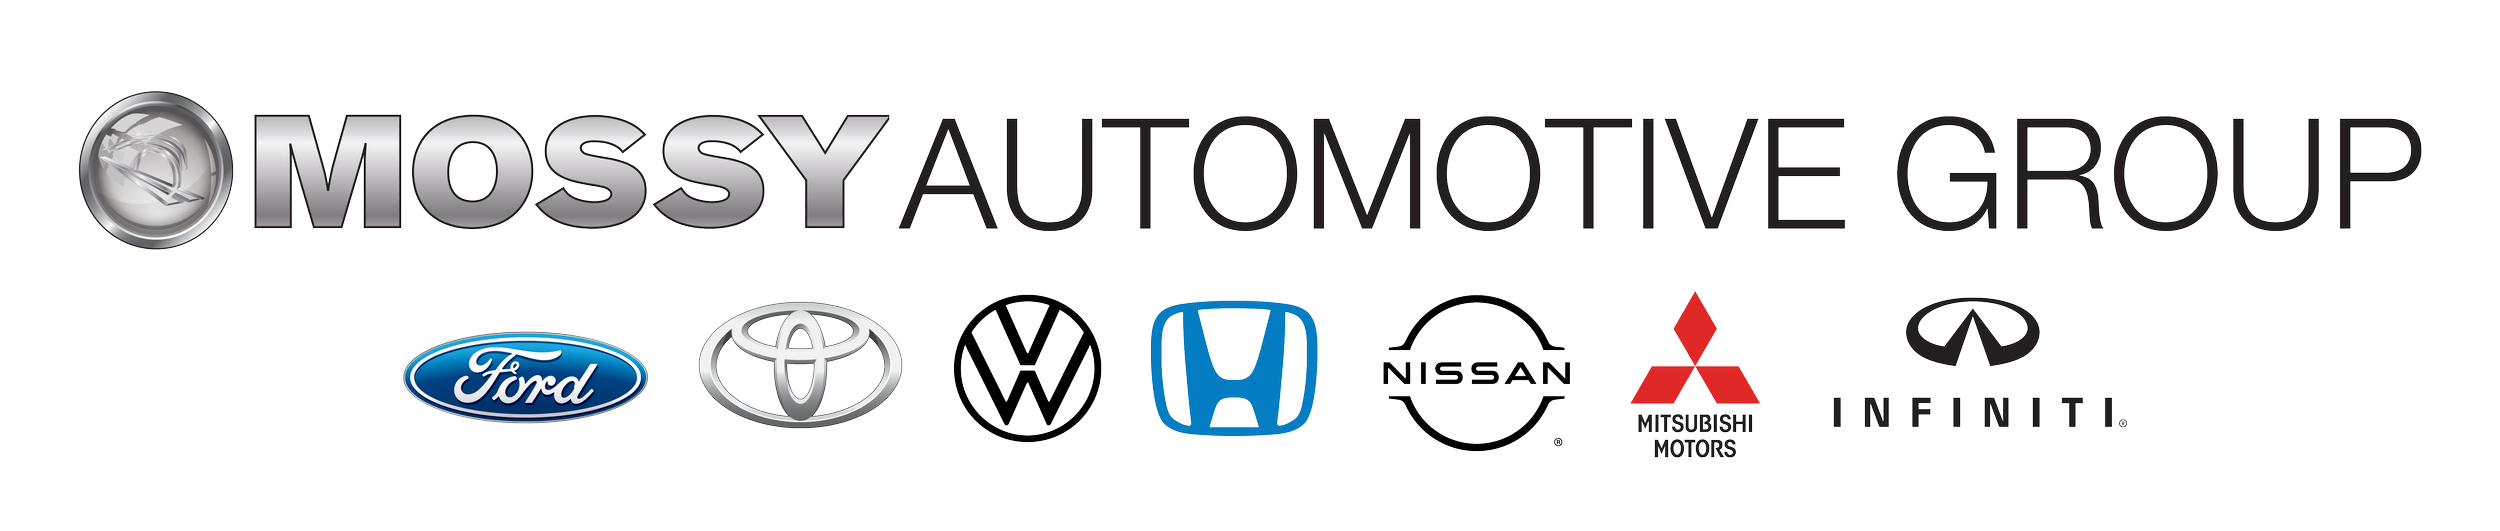 Mossy Automotive Group and Manufacturer Logos.png